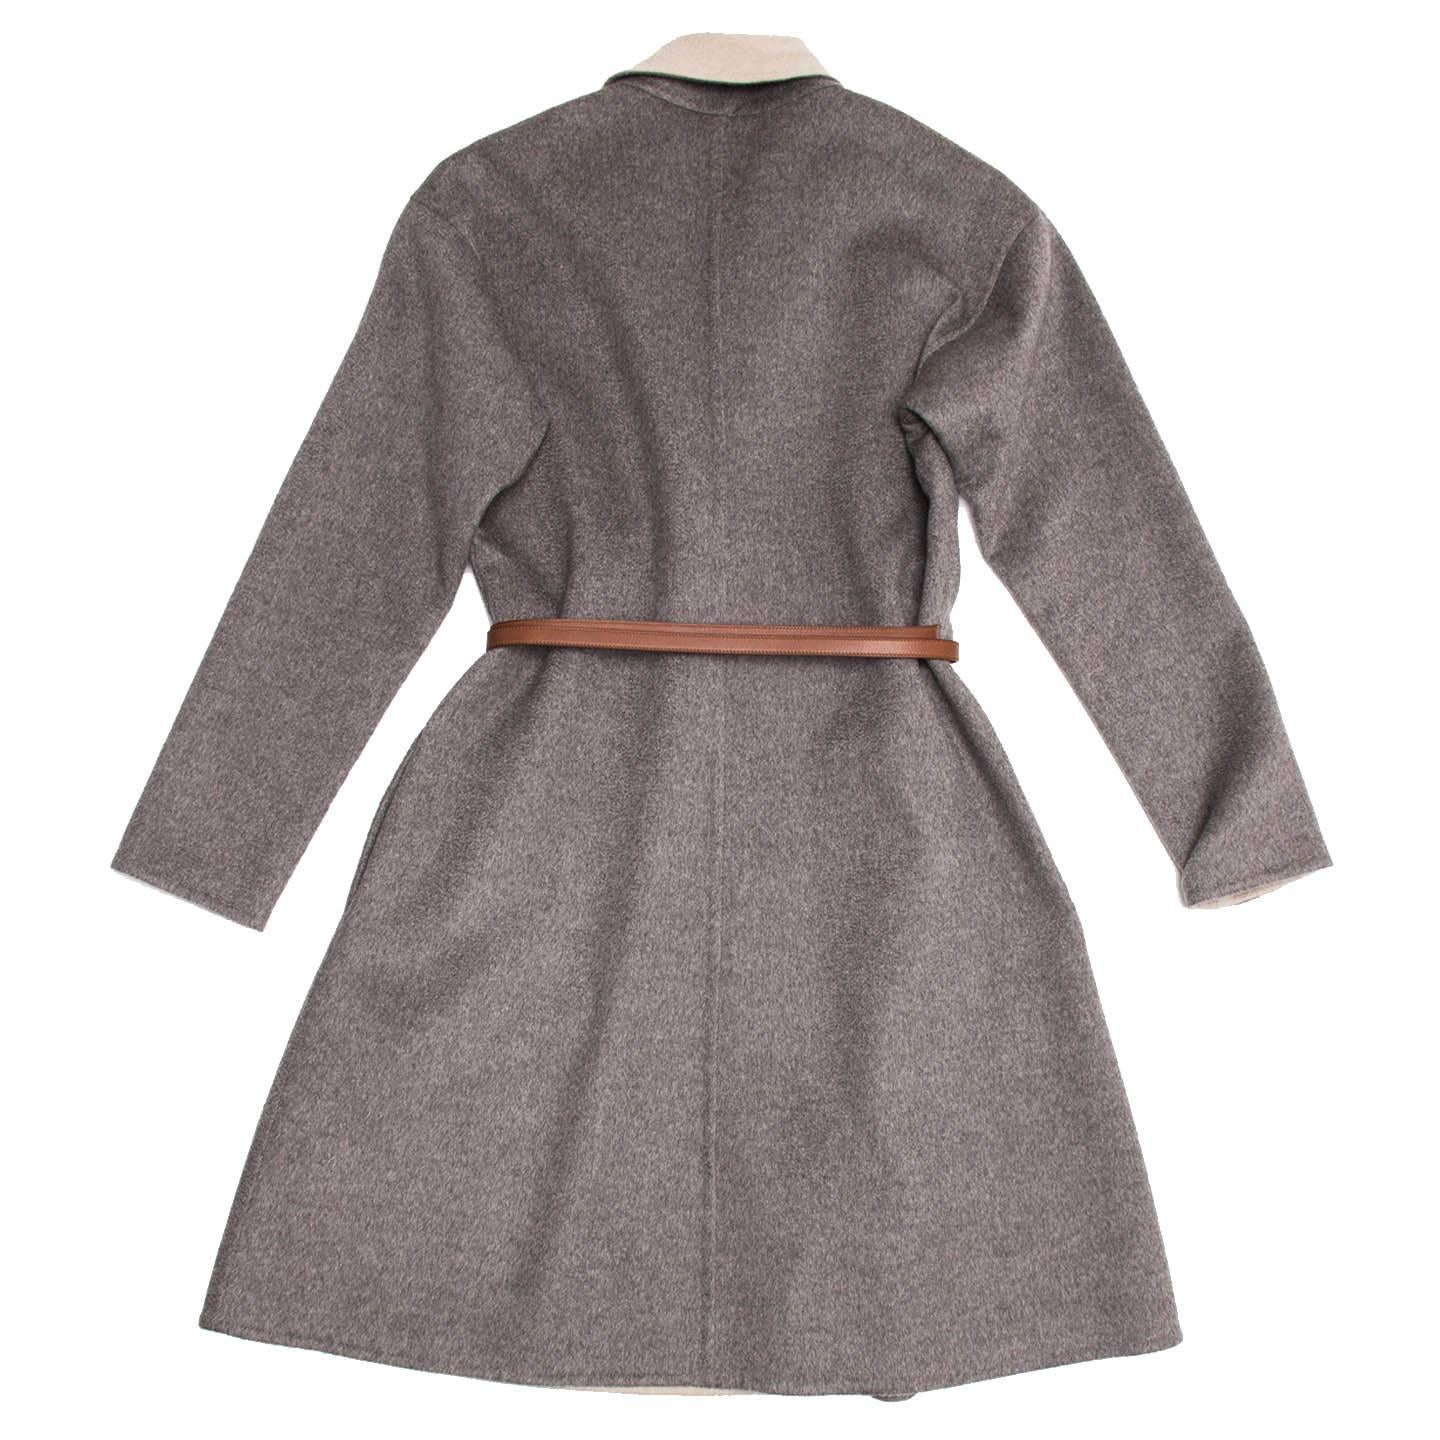 Cashmere A-line coat with heather grey outer layer, tan color lapel and inside layer. The finishing of the fabric is double face, which gives it a very clean and elegant look. A tan brown leather belt is to be wrapped around the waist and fastened